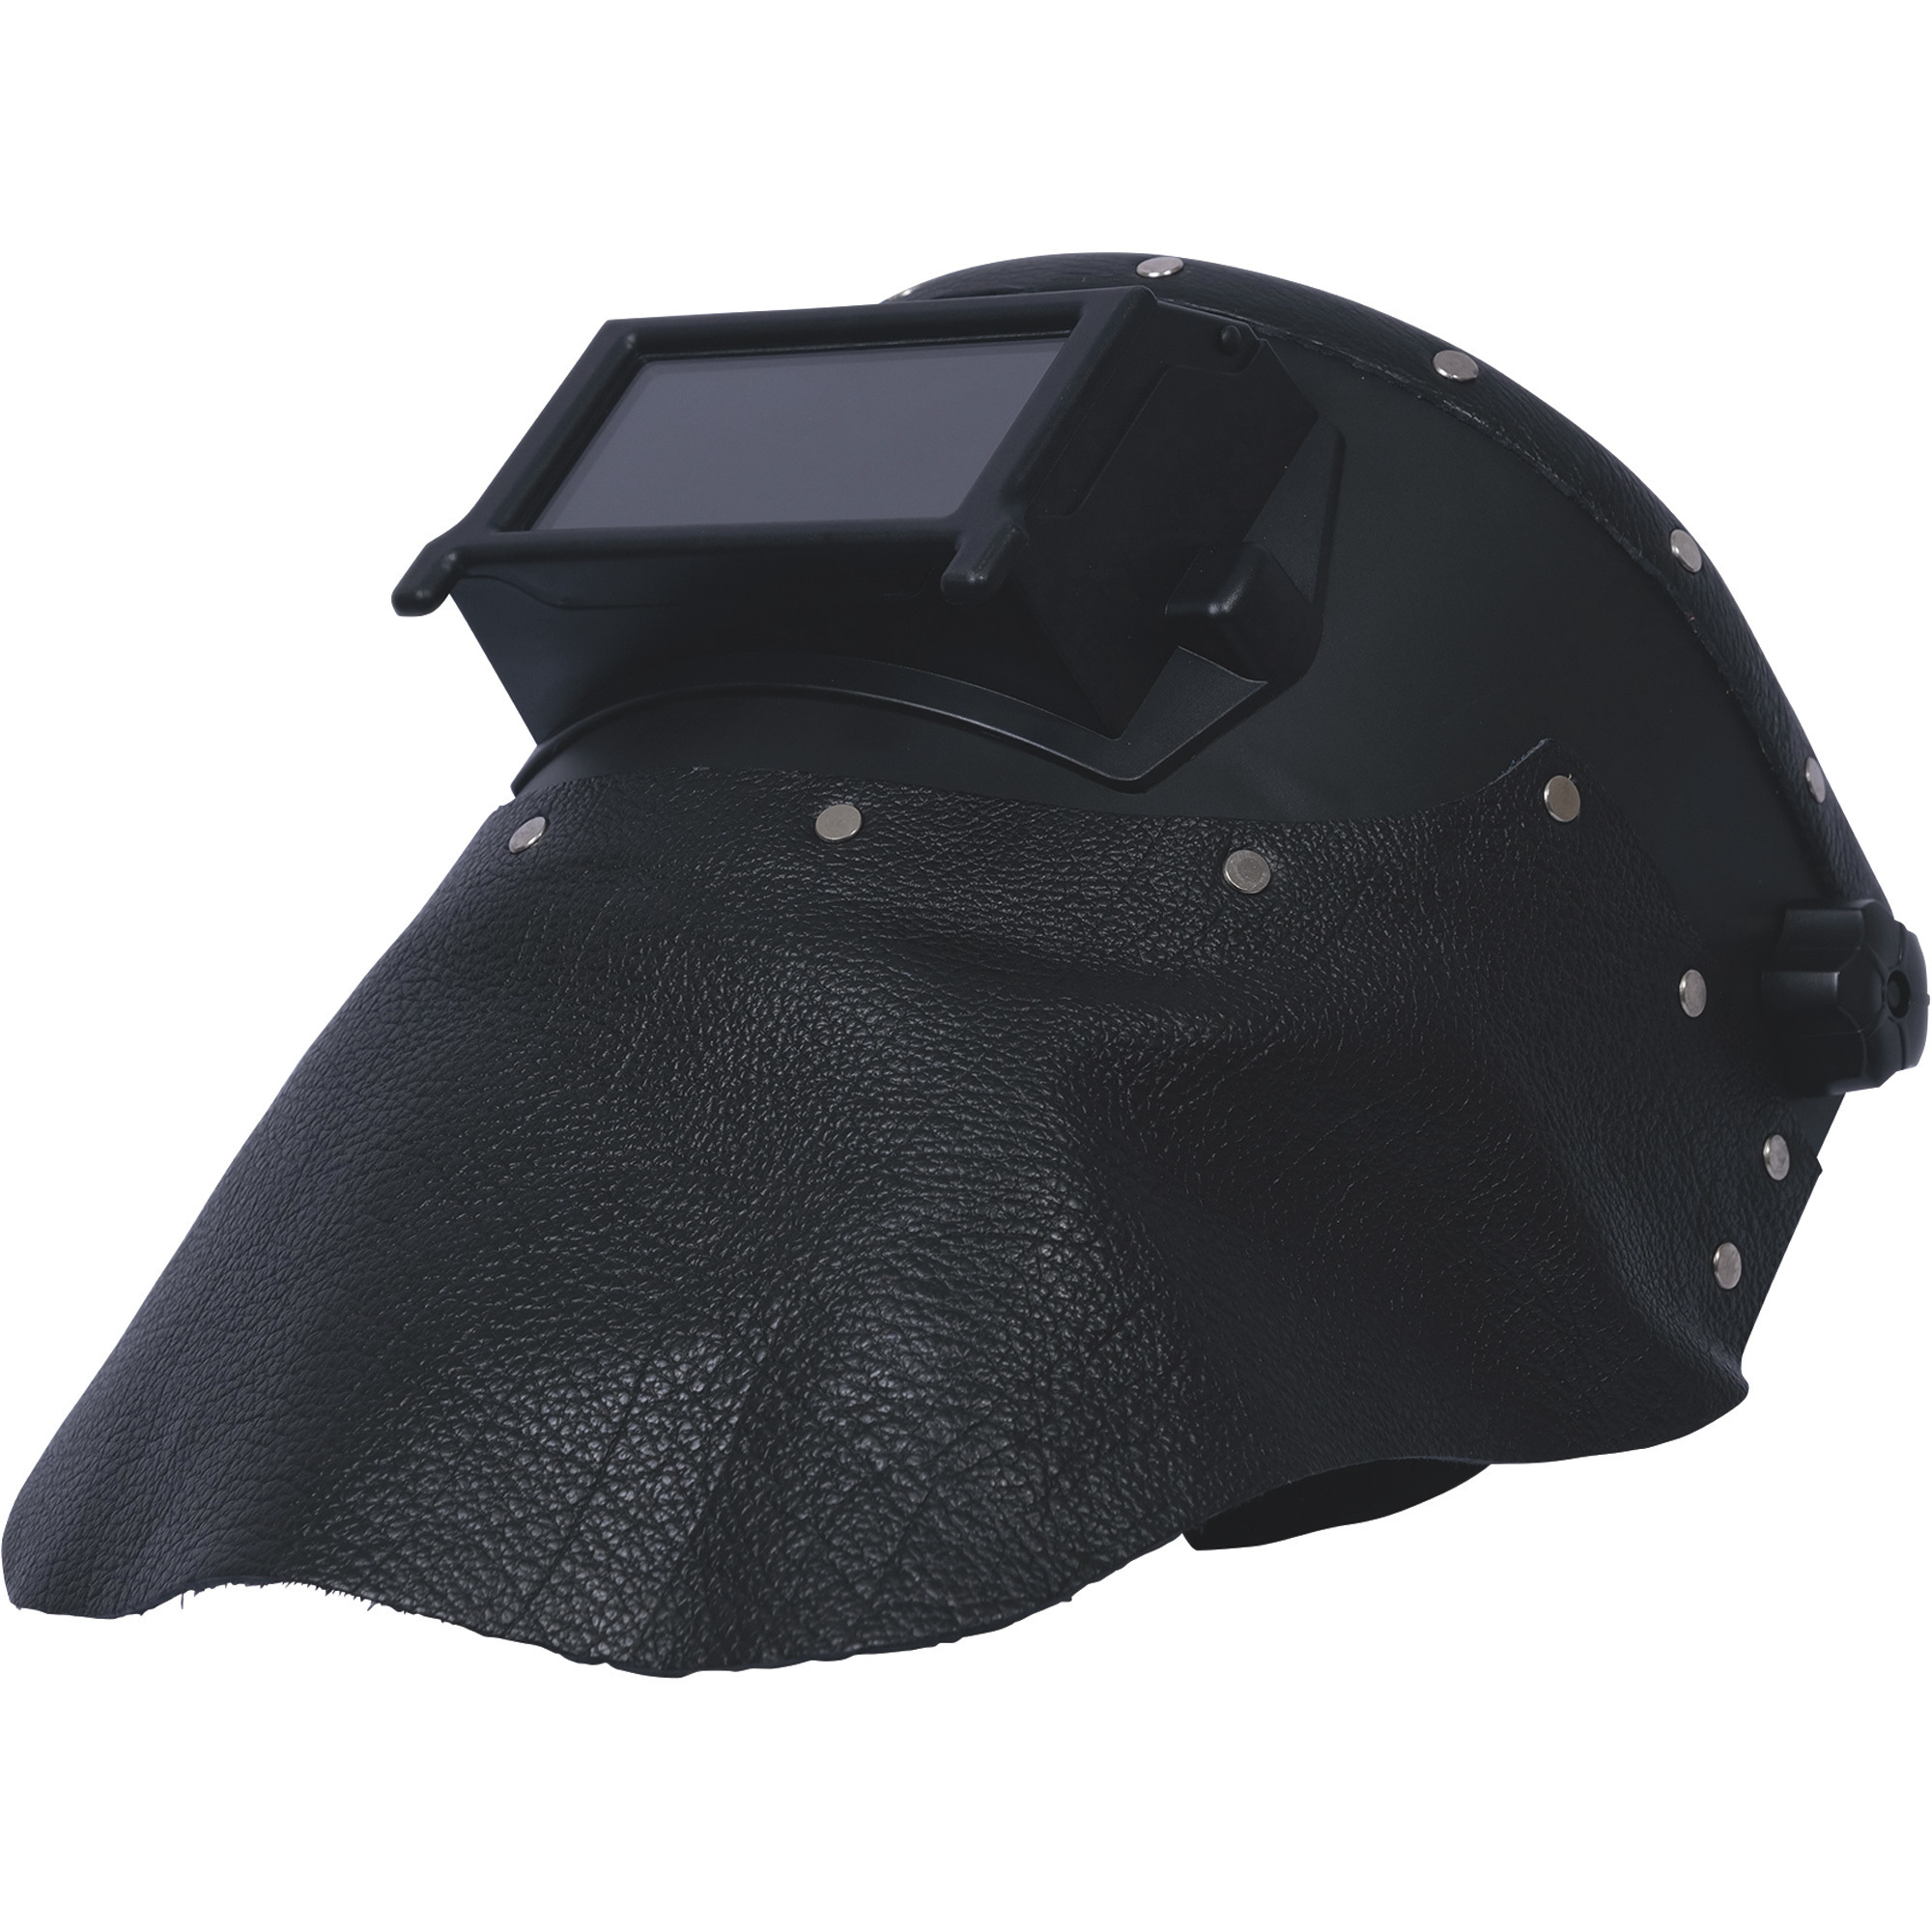 Outlaw Leather Welding Hood with Shade 10 â 2Inch x 4 1/4Inch Filter, Black, Model OL-BKL-101